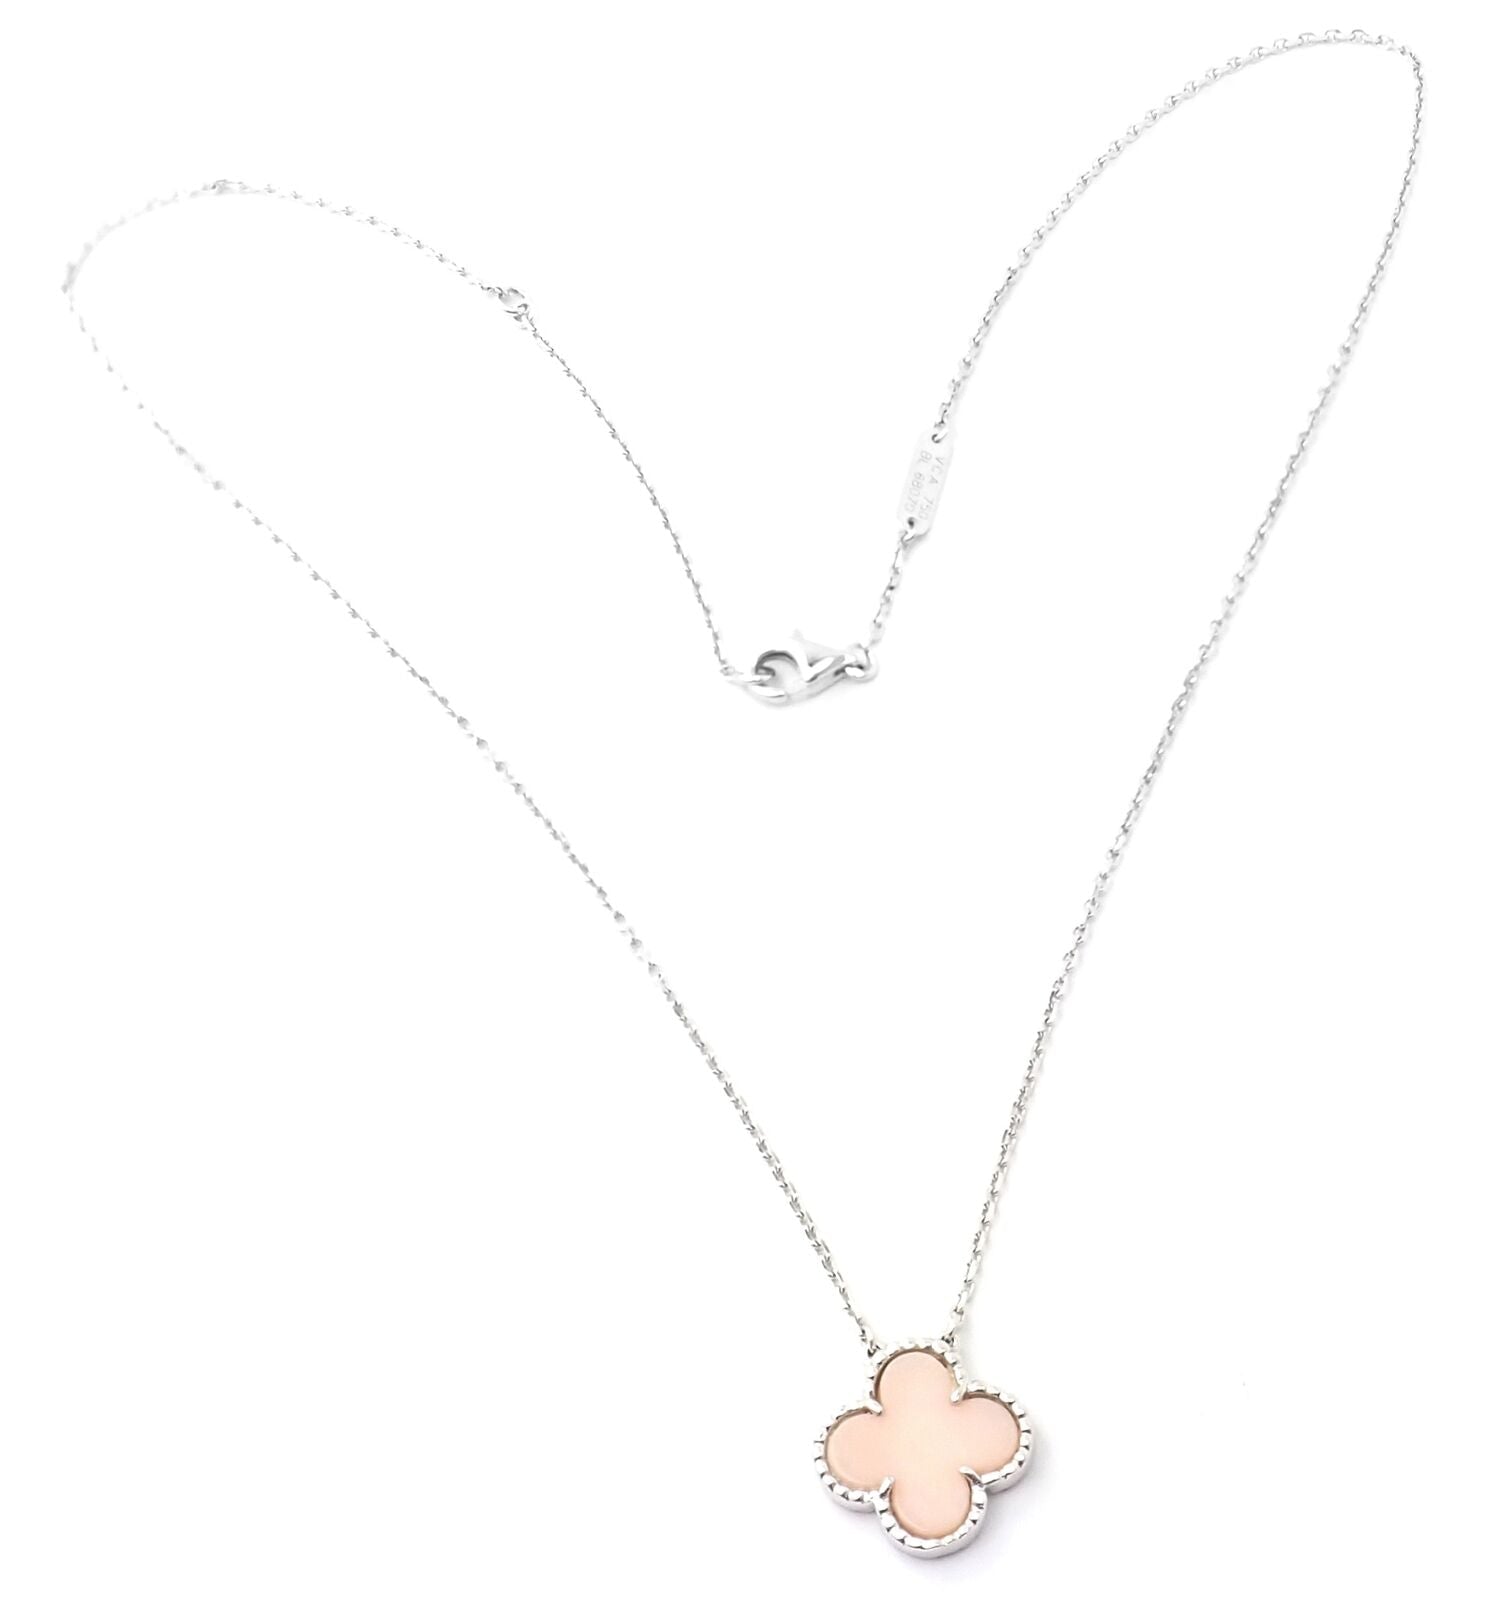 Gold Framed Flower Pendant Necklace - Pink | Claire's US